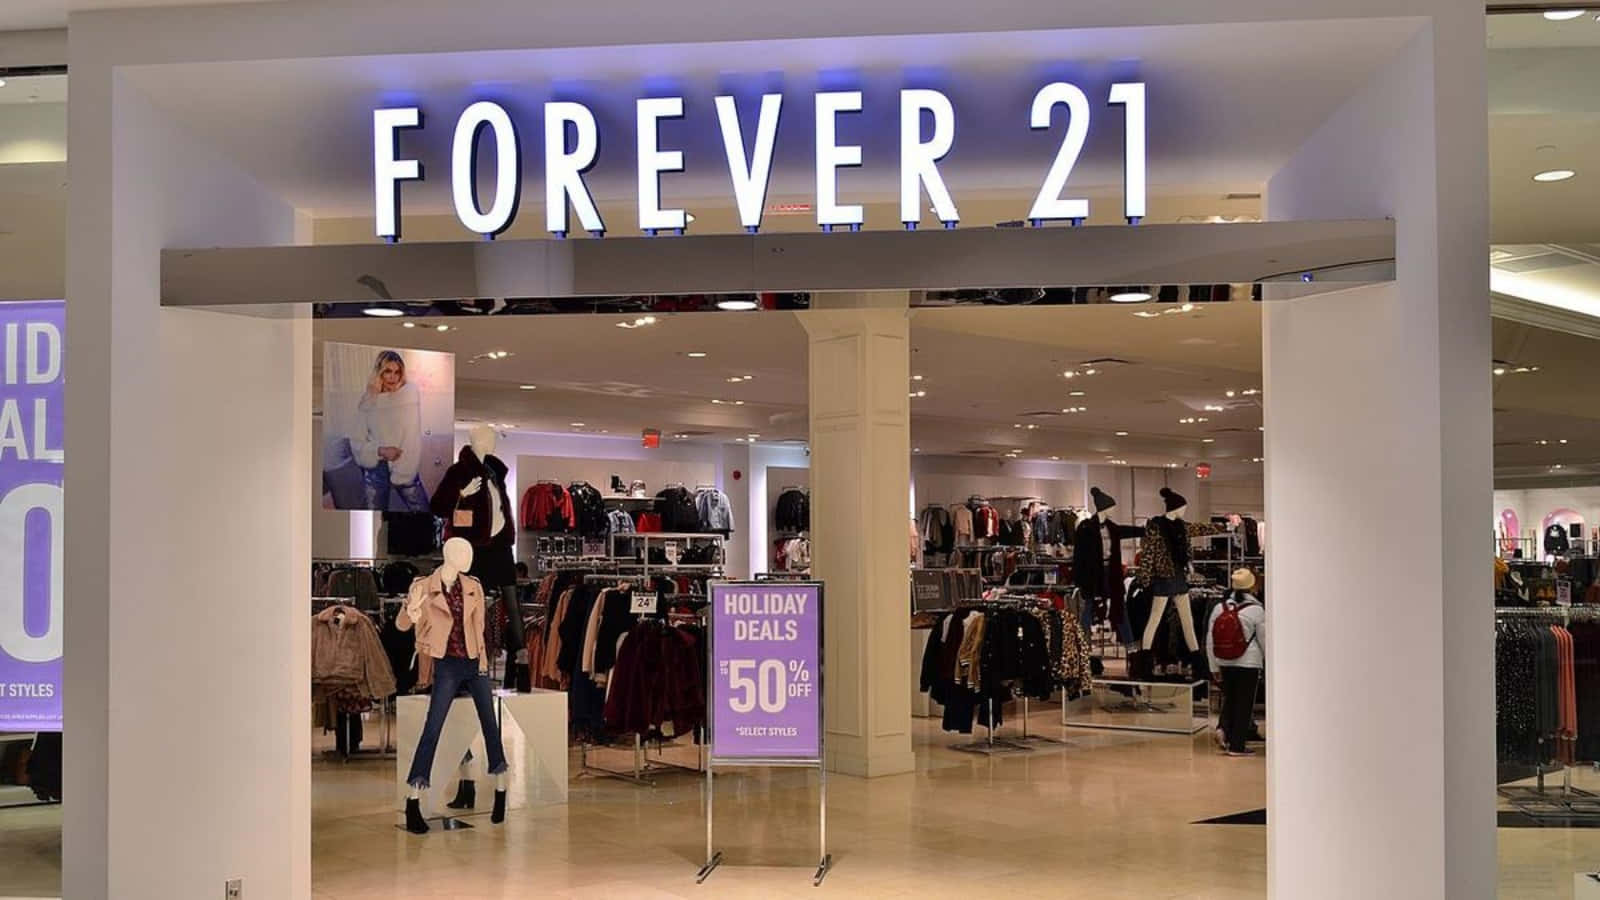 Up To 70% Off On The Latest Trends at Forever 21